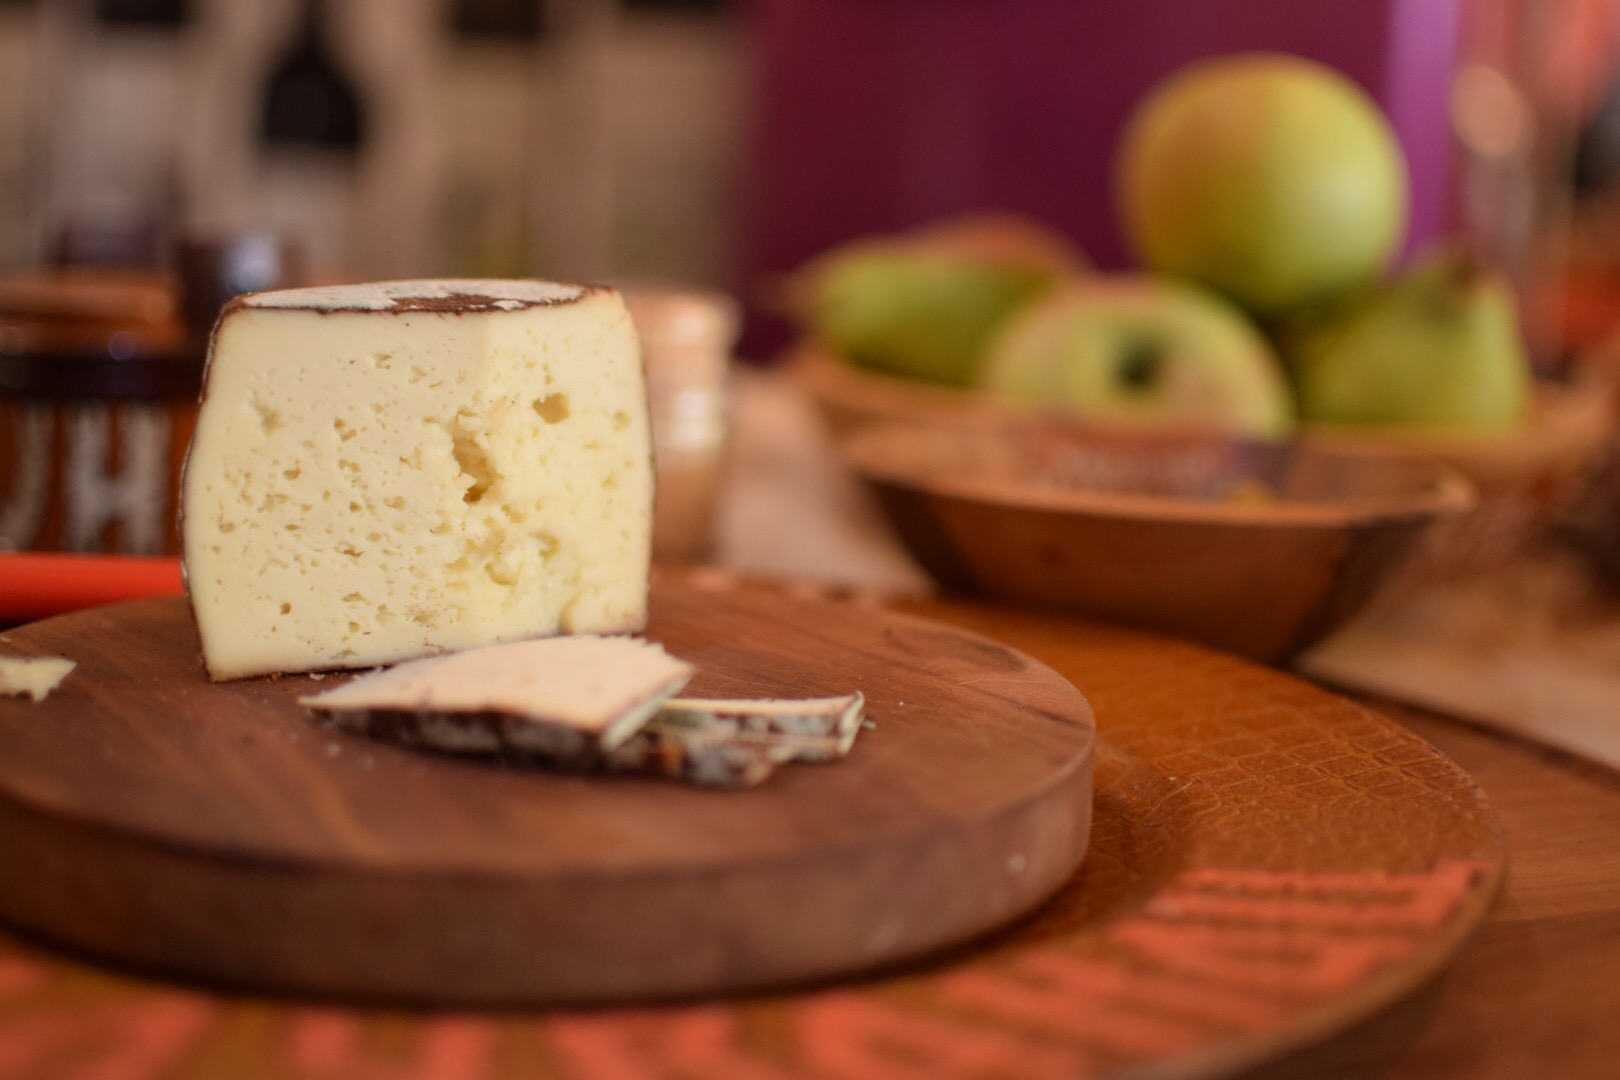 Goat cheese produced by the retired Professor Budimirović near Šabac, Serbia, was one of the best graded cheeses